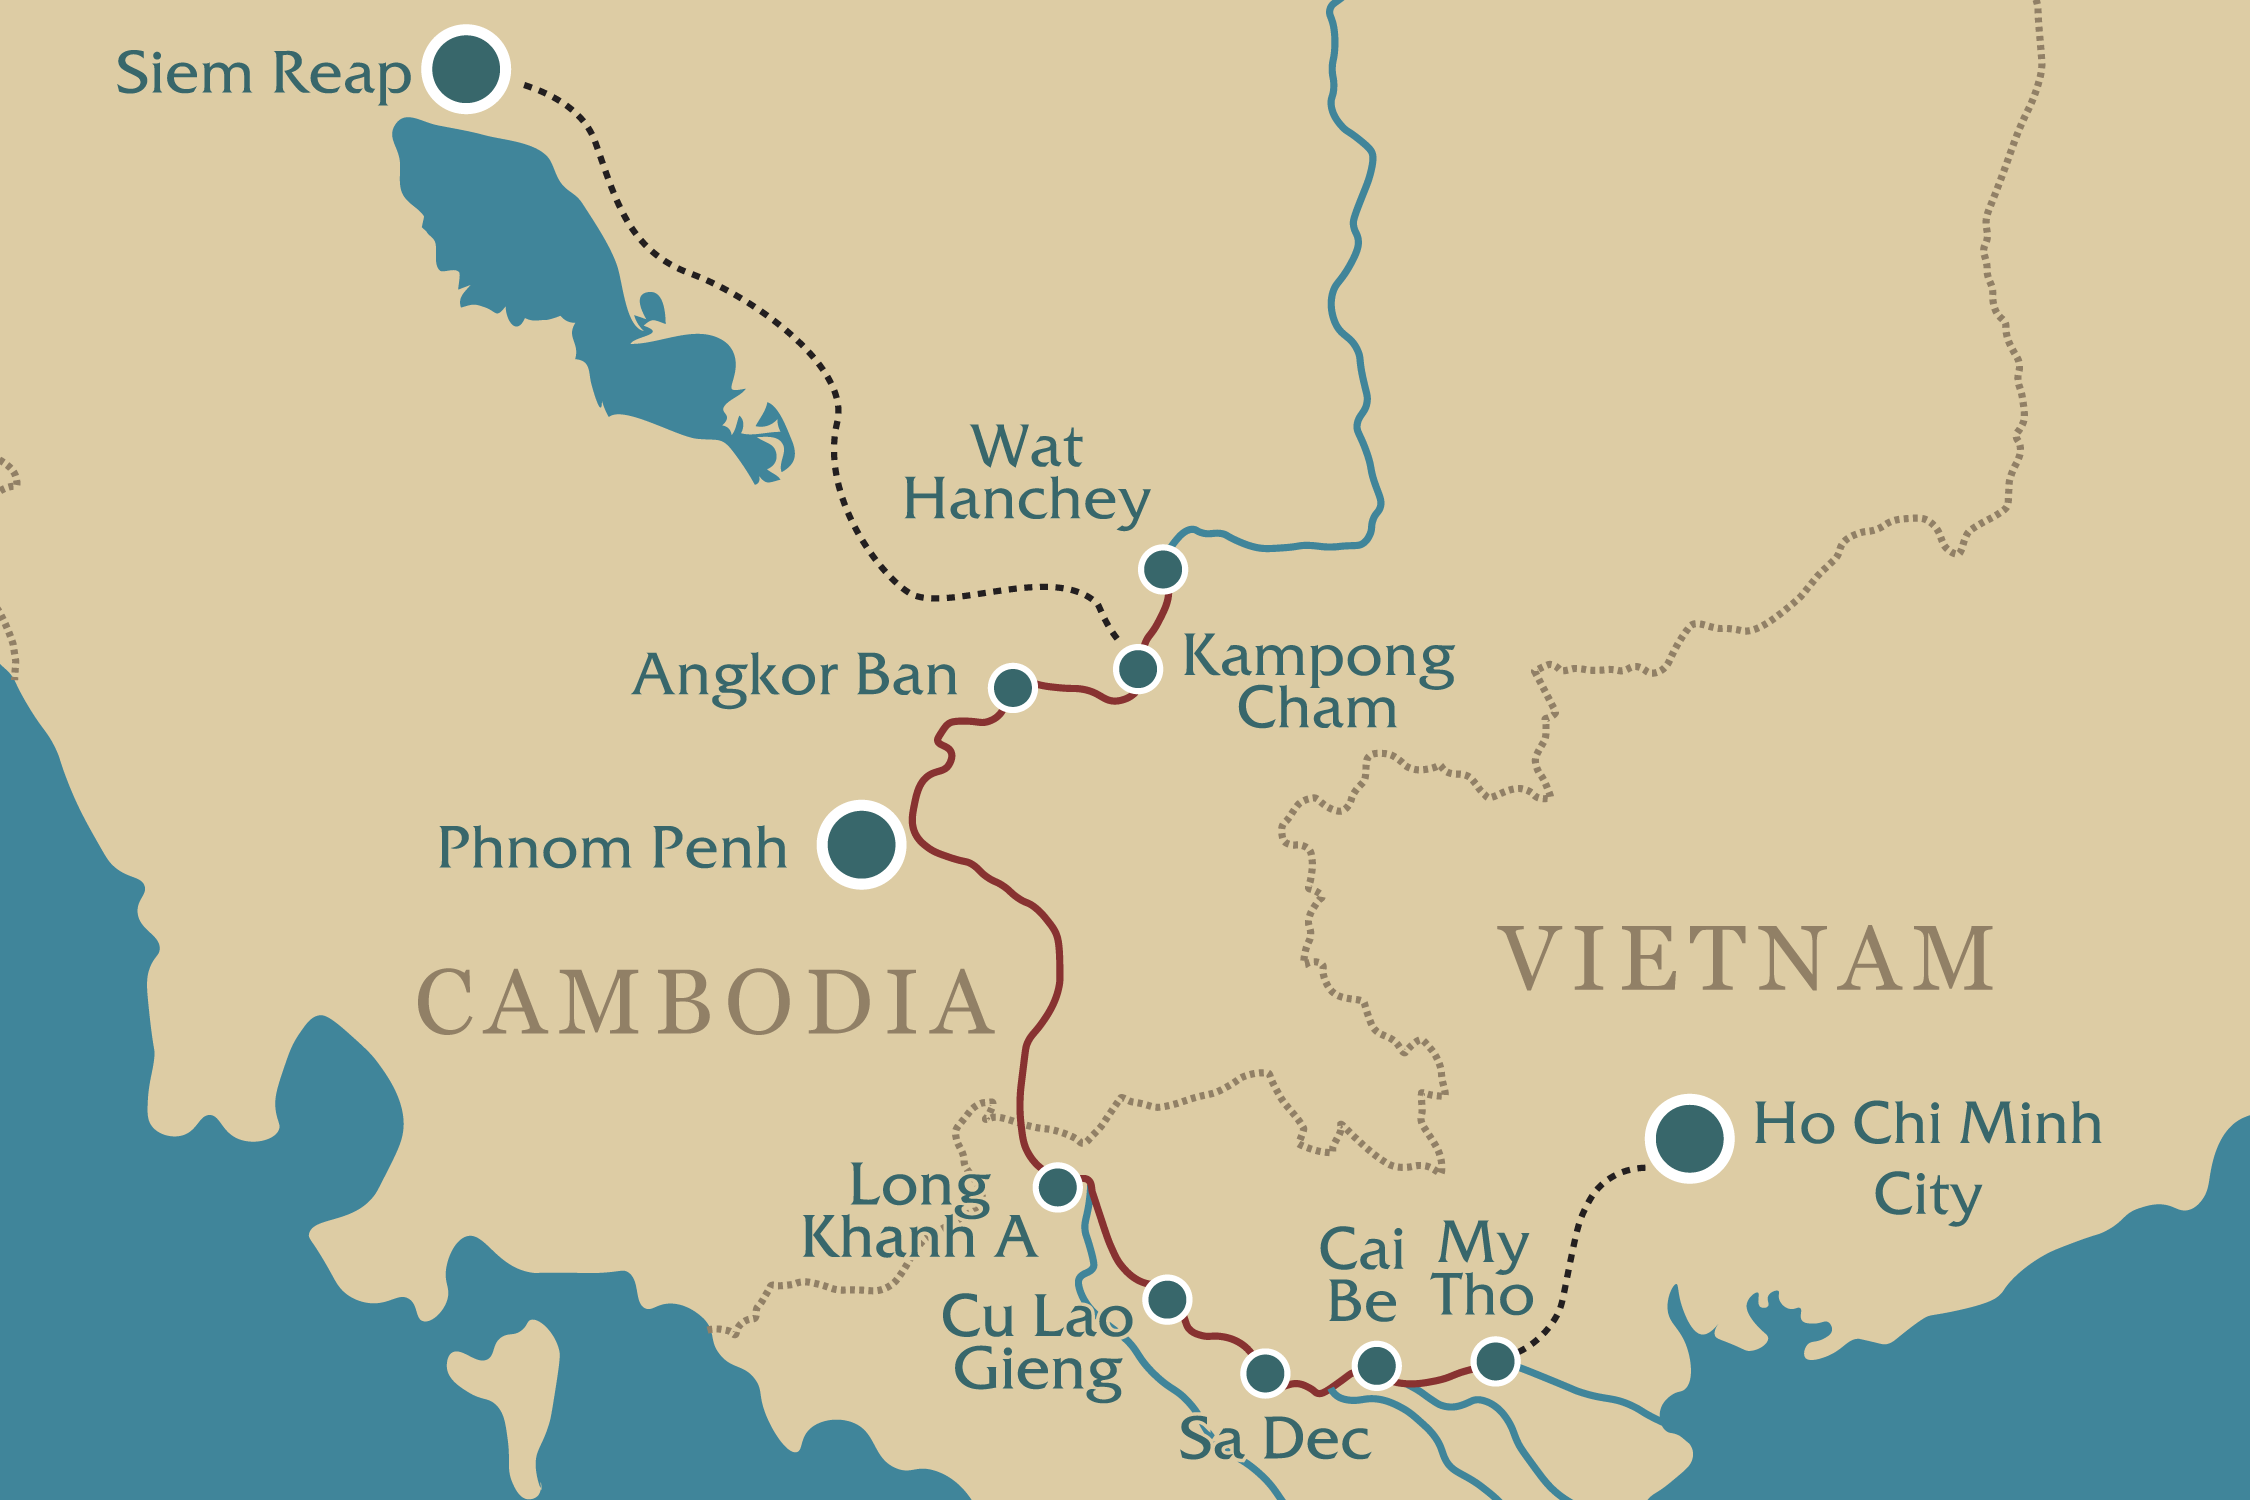 Mekong River Location On World Map - Map of world